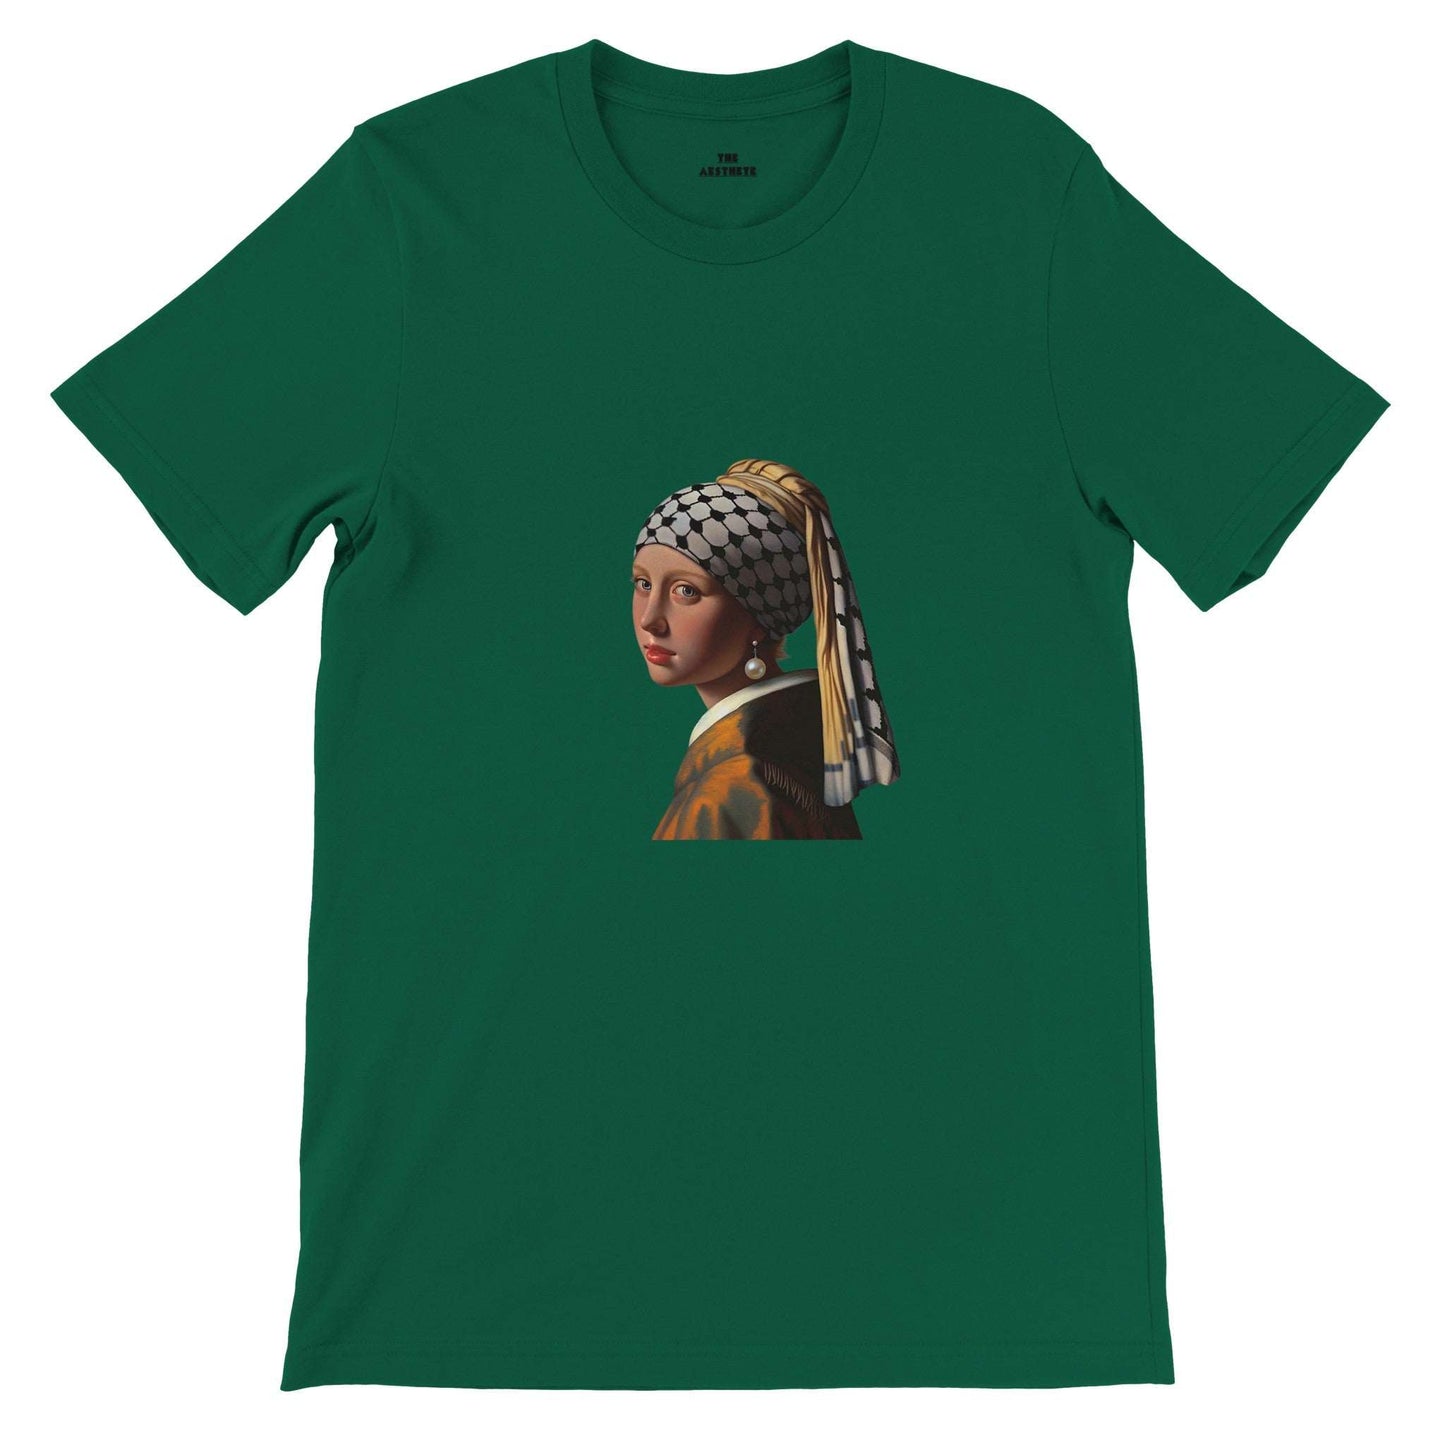 “Girl With a Pearl Earring and a Keffiyeh” T-Shirt, Sweatshirt, and Zipped-Hoodie - Art for Palestine Collection